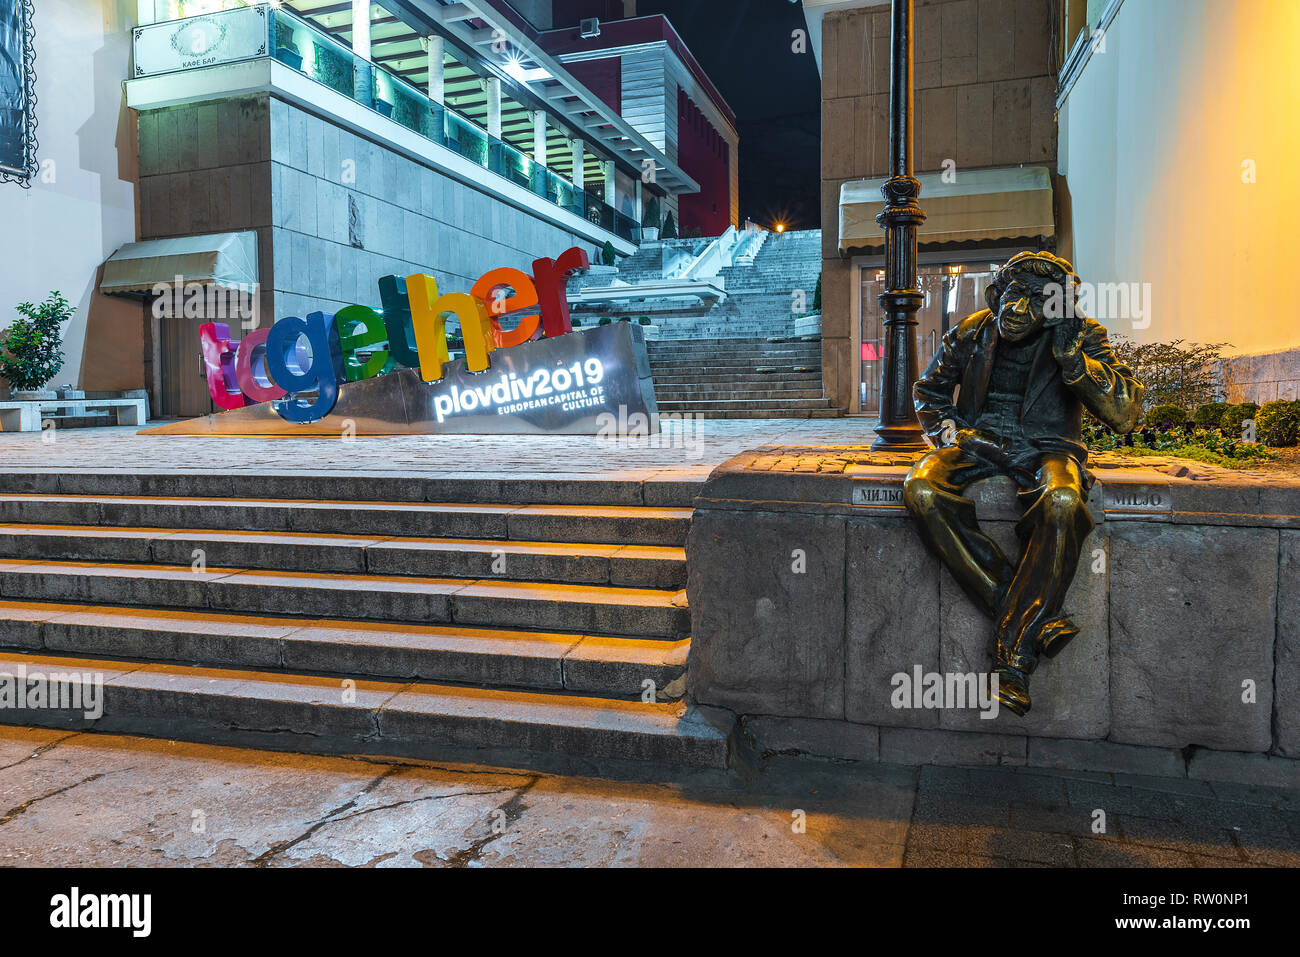 PLOVDIV CITY, BULGARIA - March 3 2019 - Night in the center of Plovdiv city- European Capital of Culture 2019 with Statue of Milyo the Crazy in front Stock Photo